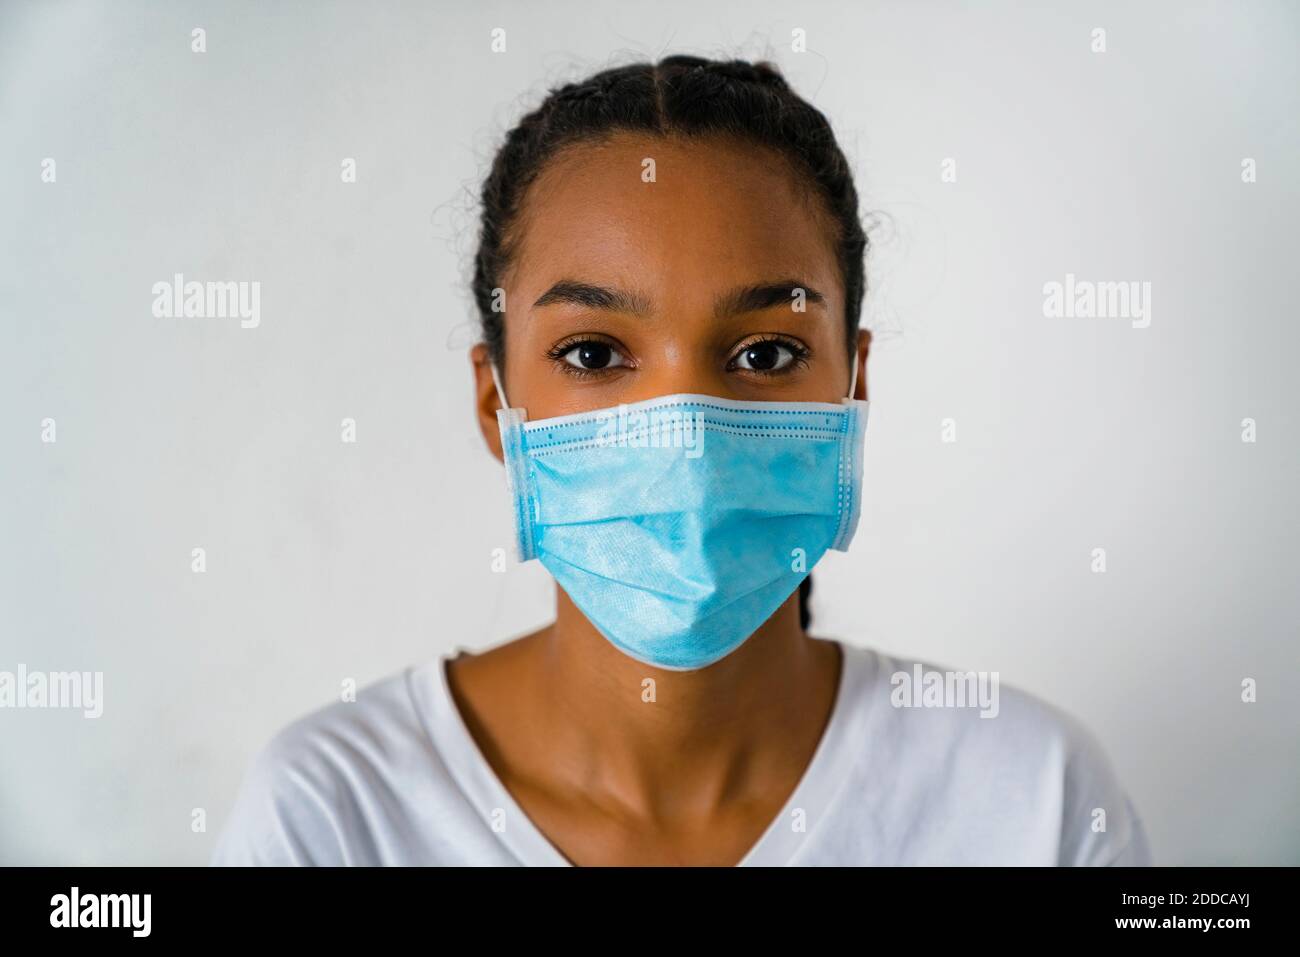 Teenage girl wearing protective face mask standing against wall during covid-19 Stock Photo